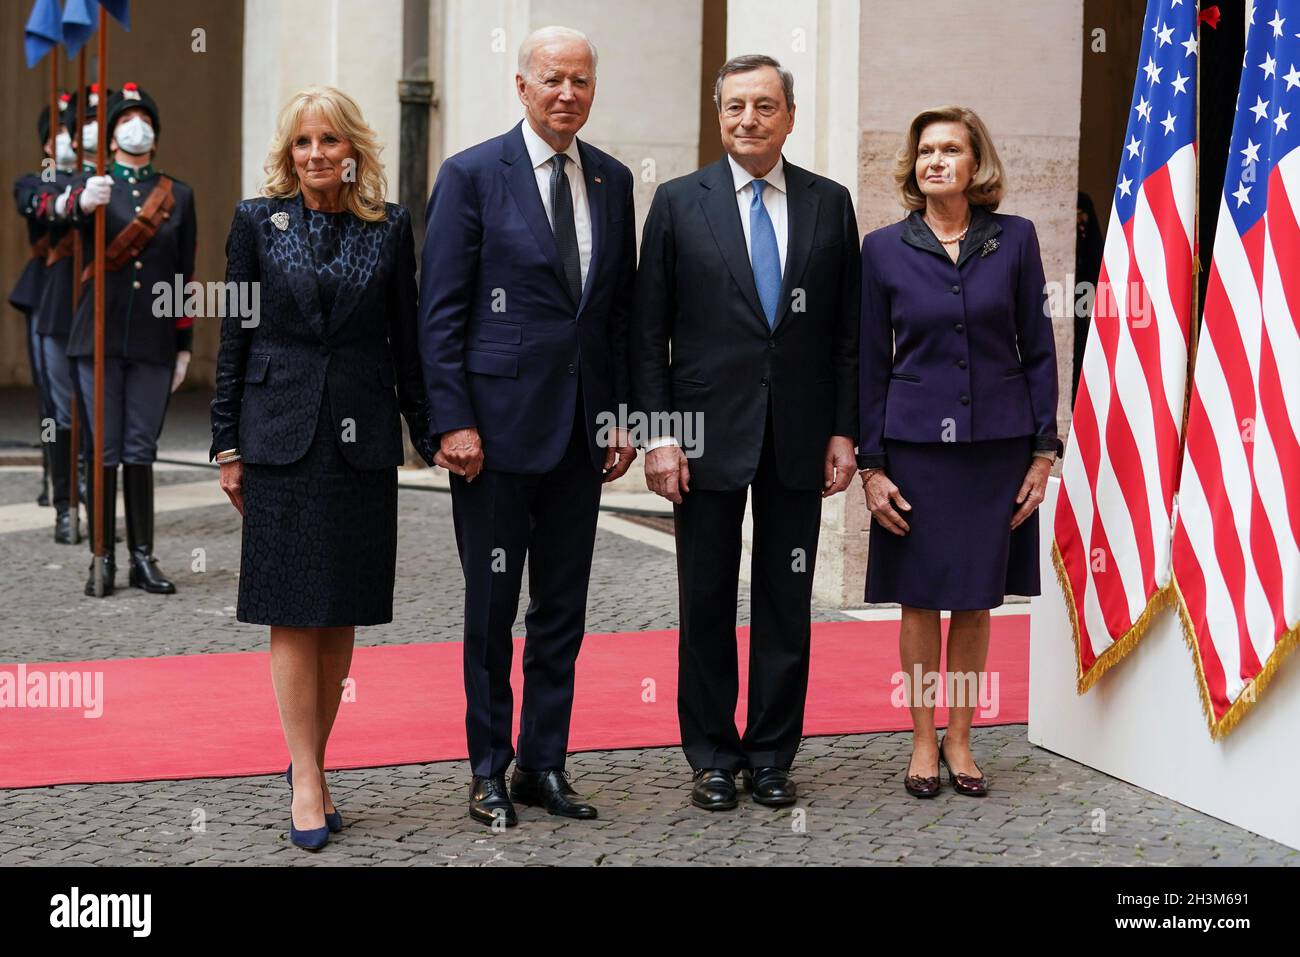 U.S. President Joe Biden and his wife Jill Biden stand next to Italian  Prime Minister Mario Draghi and his wife Maria Serenella Cappello as they  meet ahead of the G20 summit, in